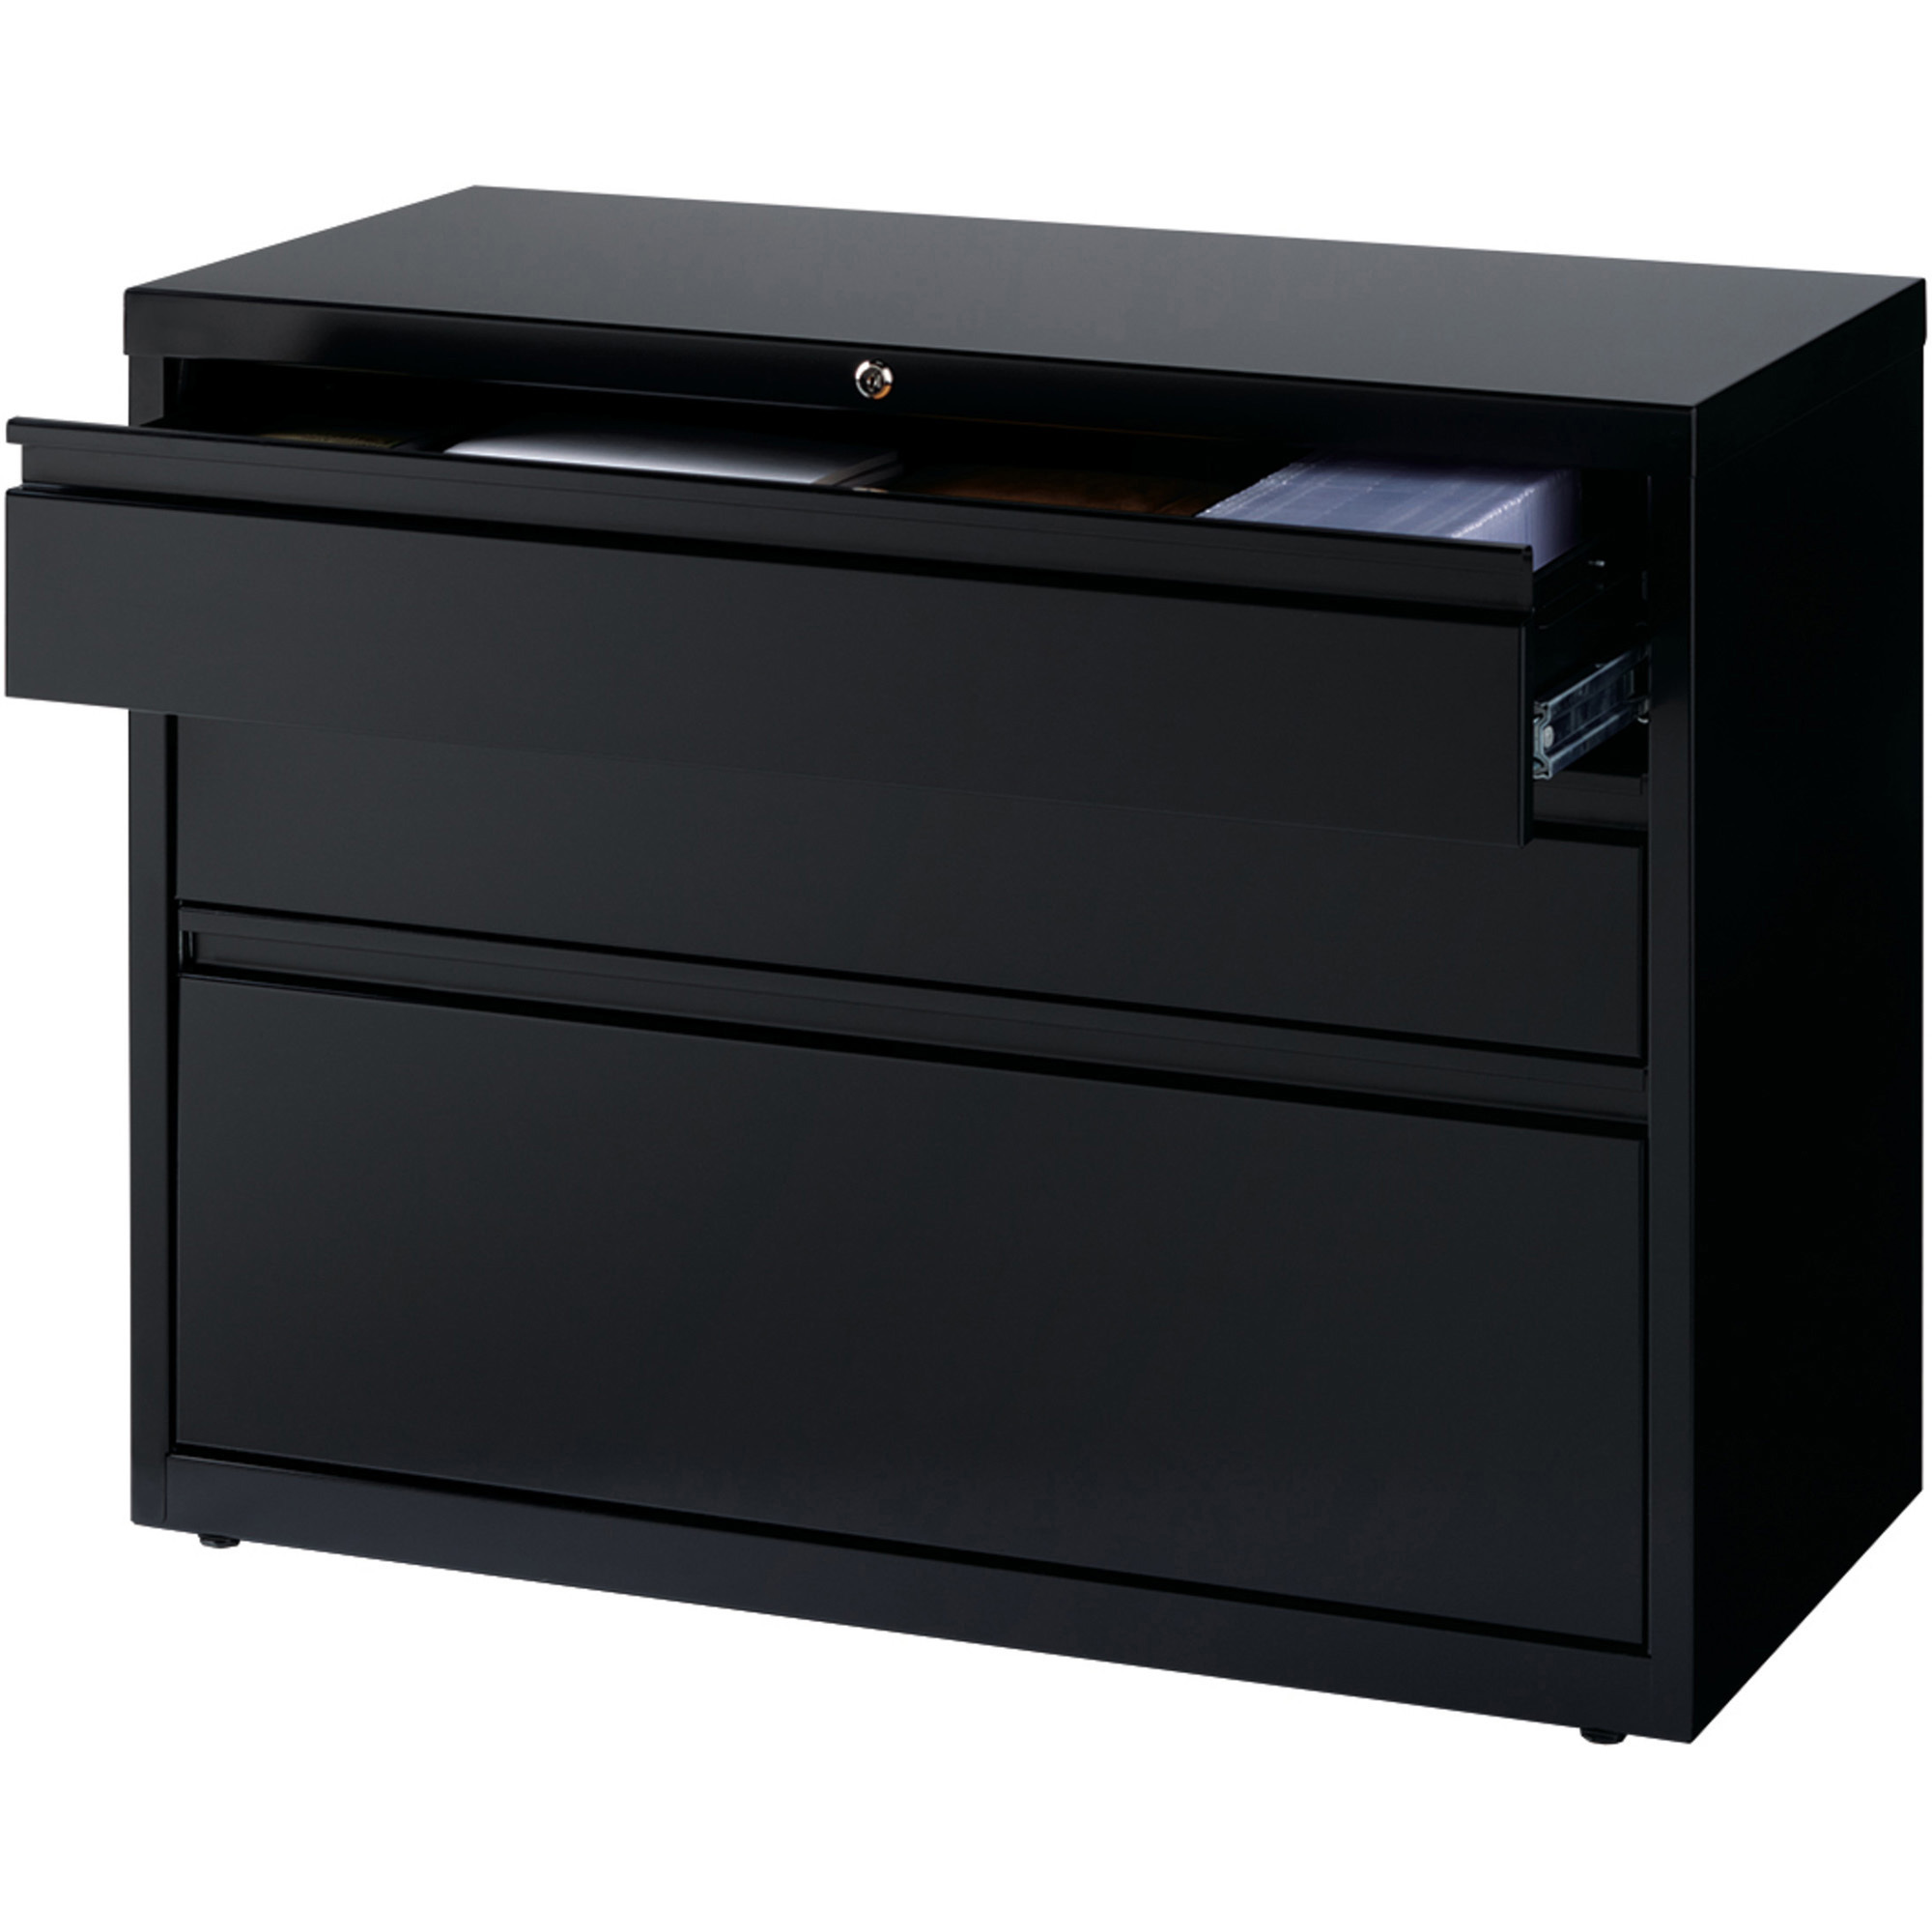 Llr 60929 Lorell 36 Box File Lateral Cabinet Furniture